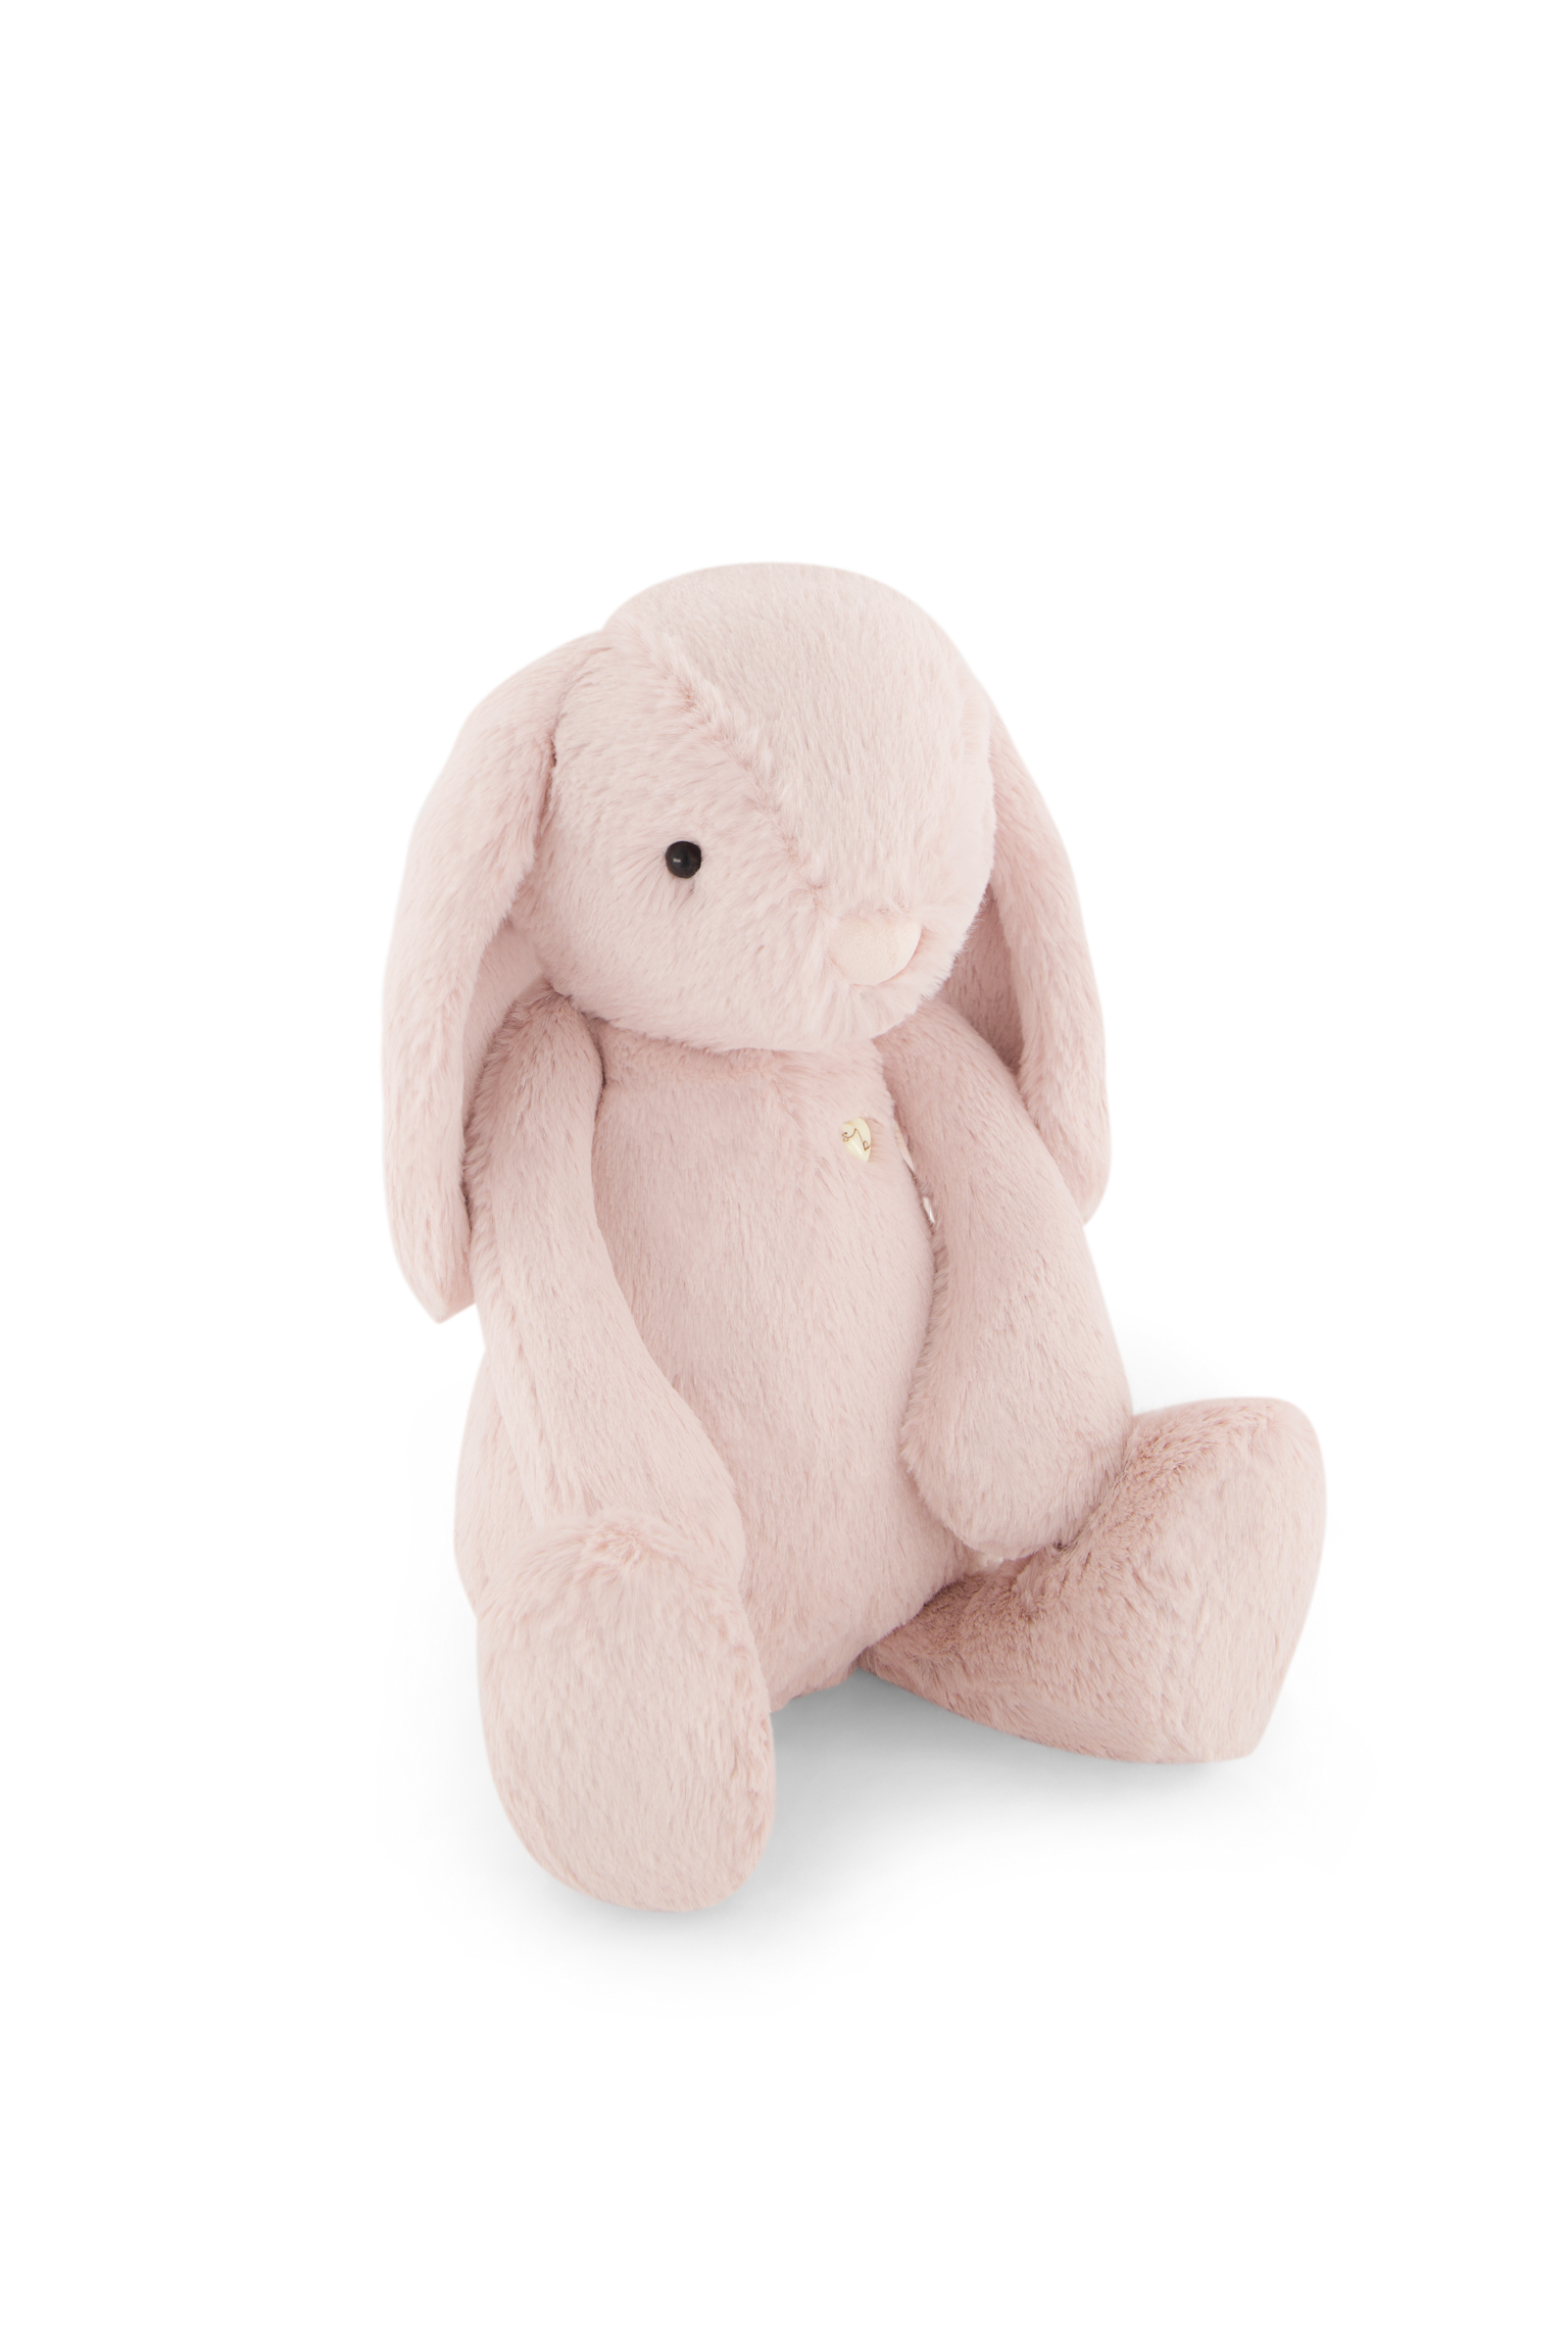 Snuggle Bunnies 30cm Penelope The Bunny - Blush Front_Side